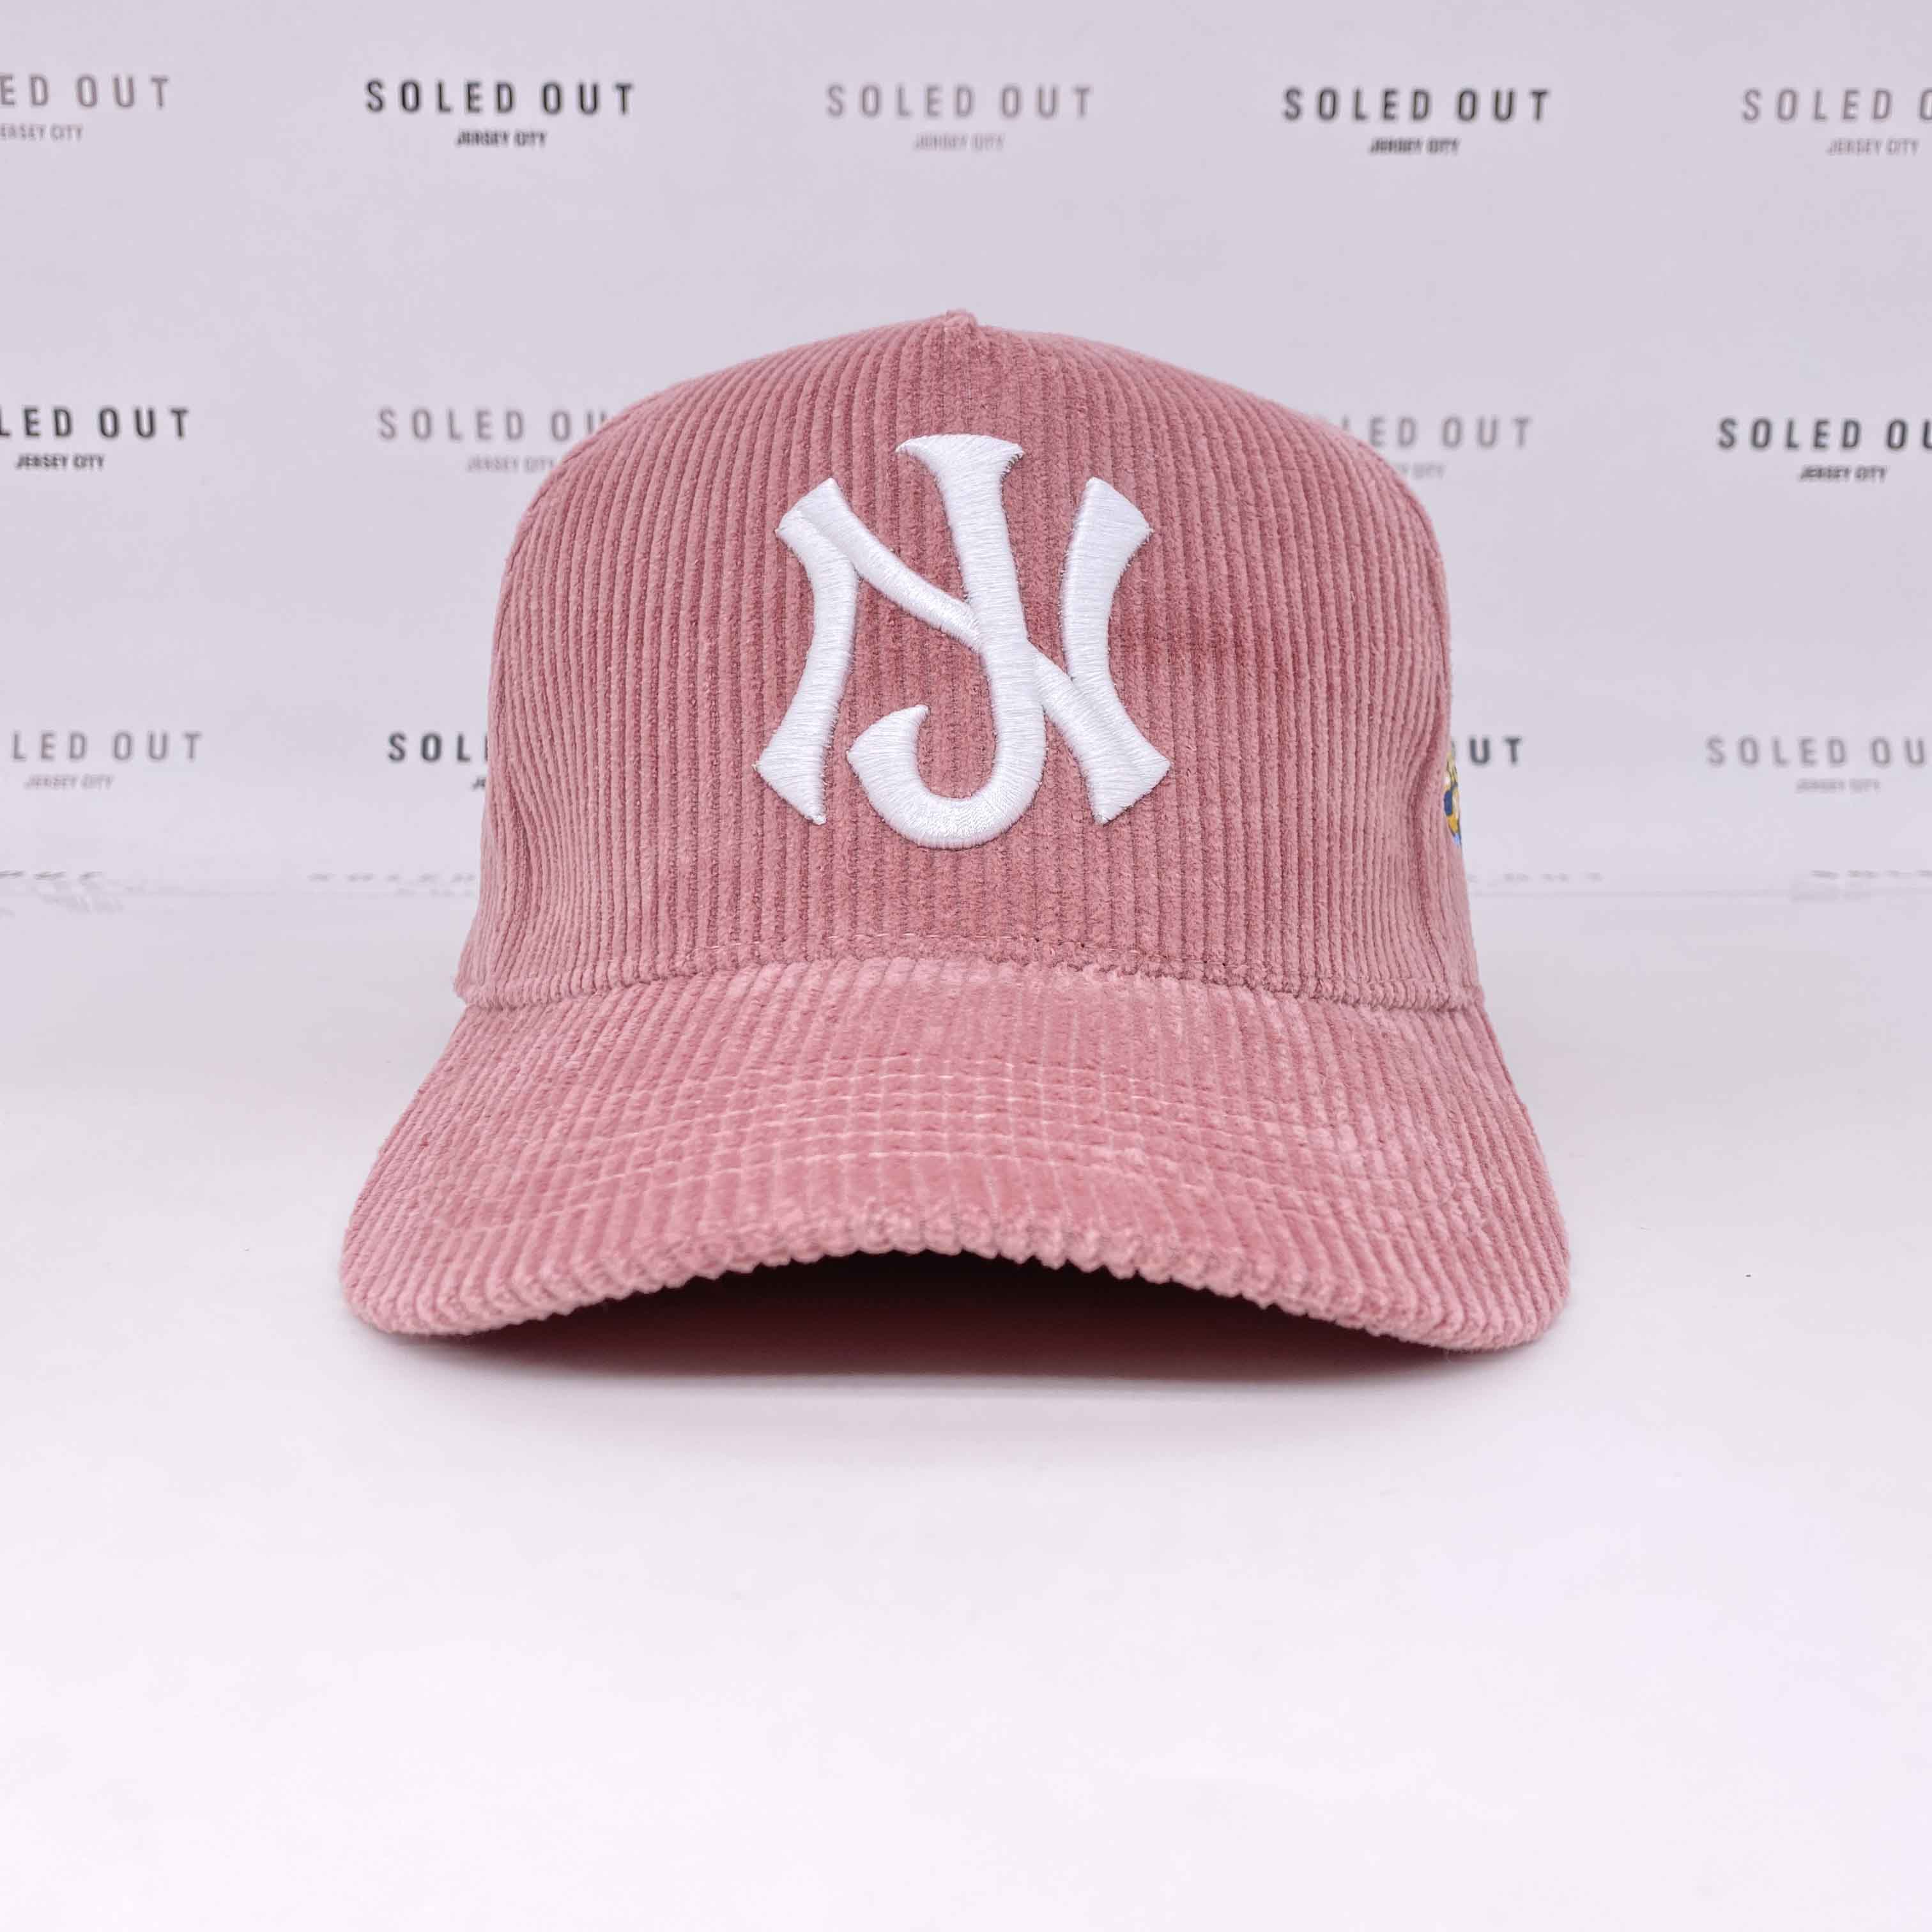 Soled Out Snapback "CORDUROY SALMON" 2022 New Size OS